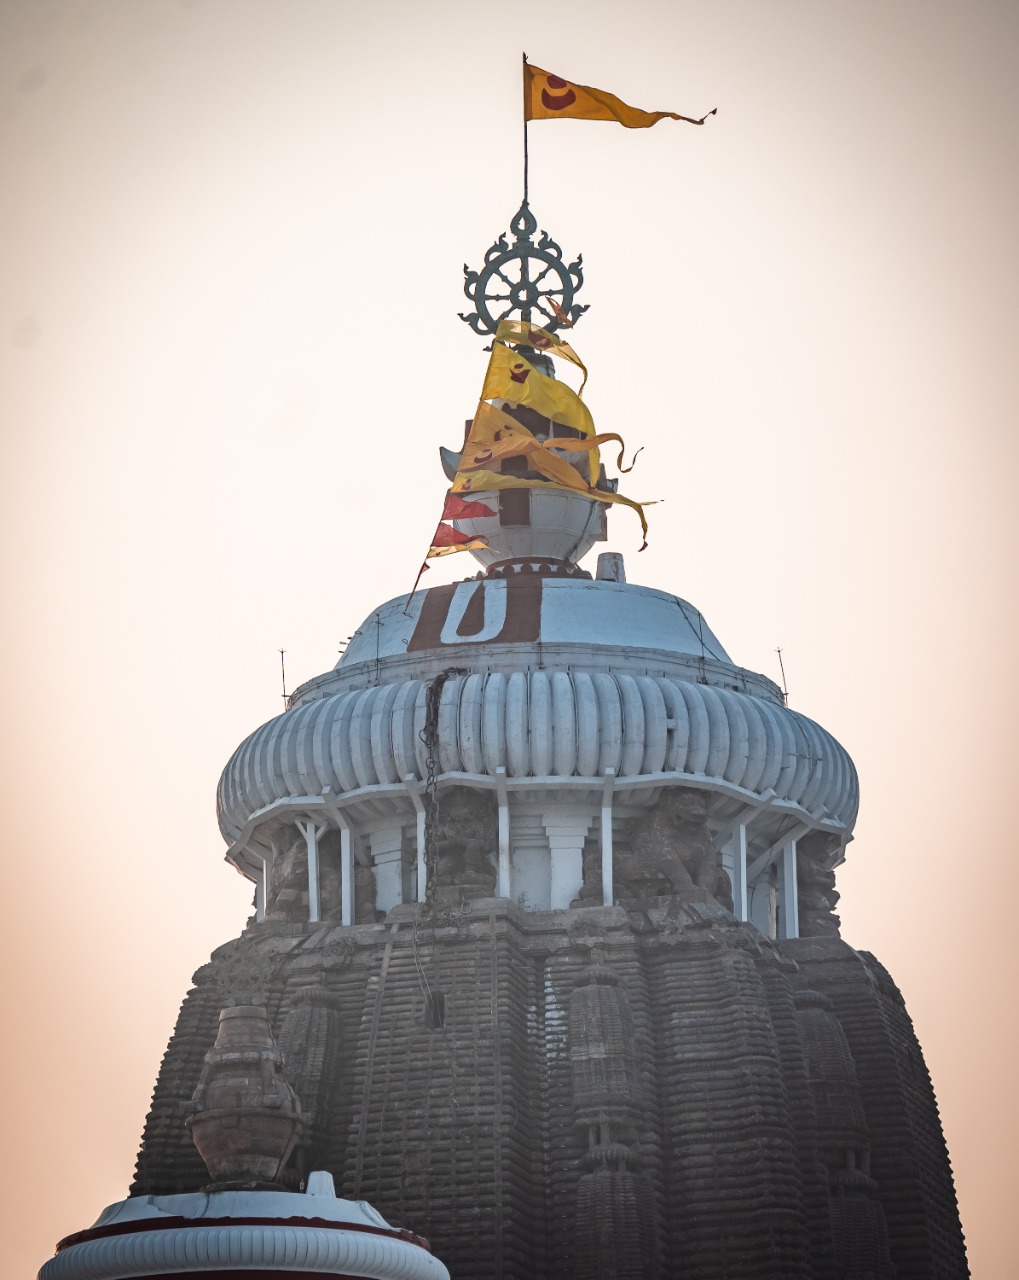 Birds or any aircraft do not fly over this temple, scientists are also troubled while searching for reasons